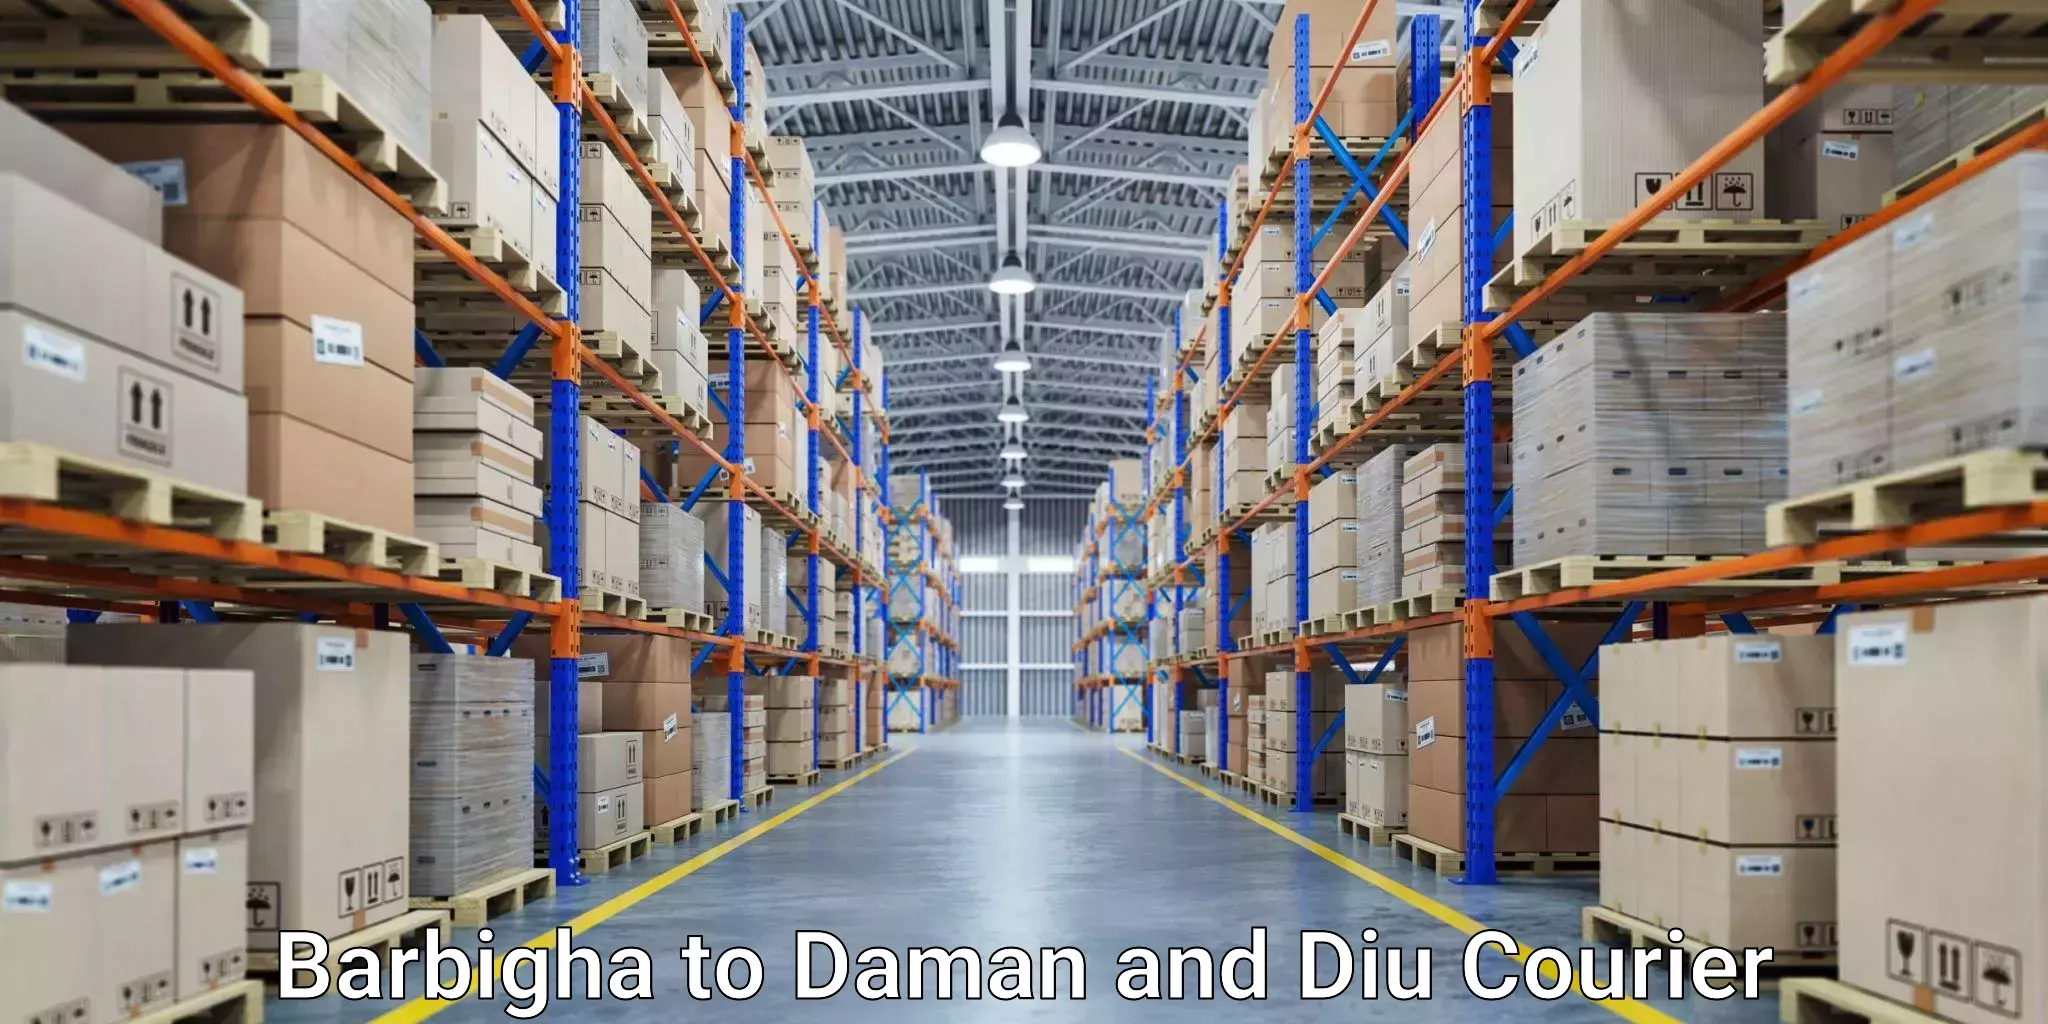 Multi-national courier services Barbigha to Daman and Diu